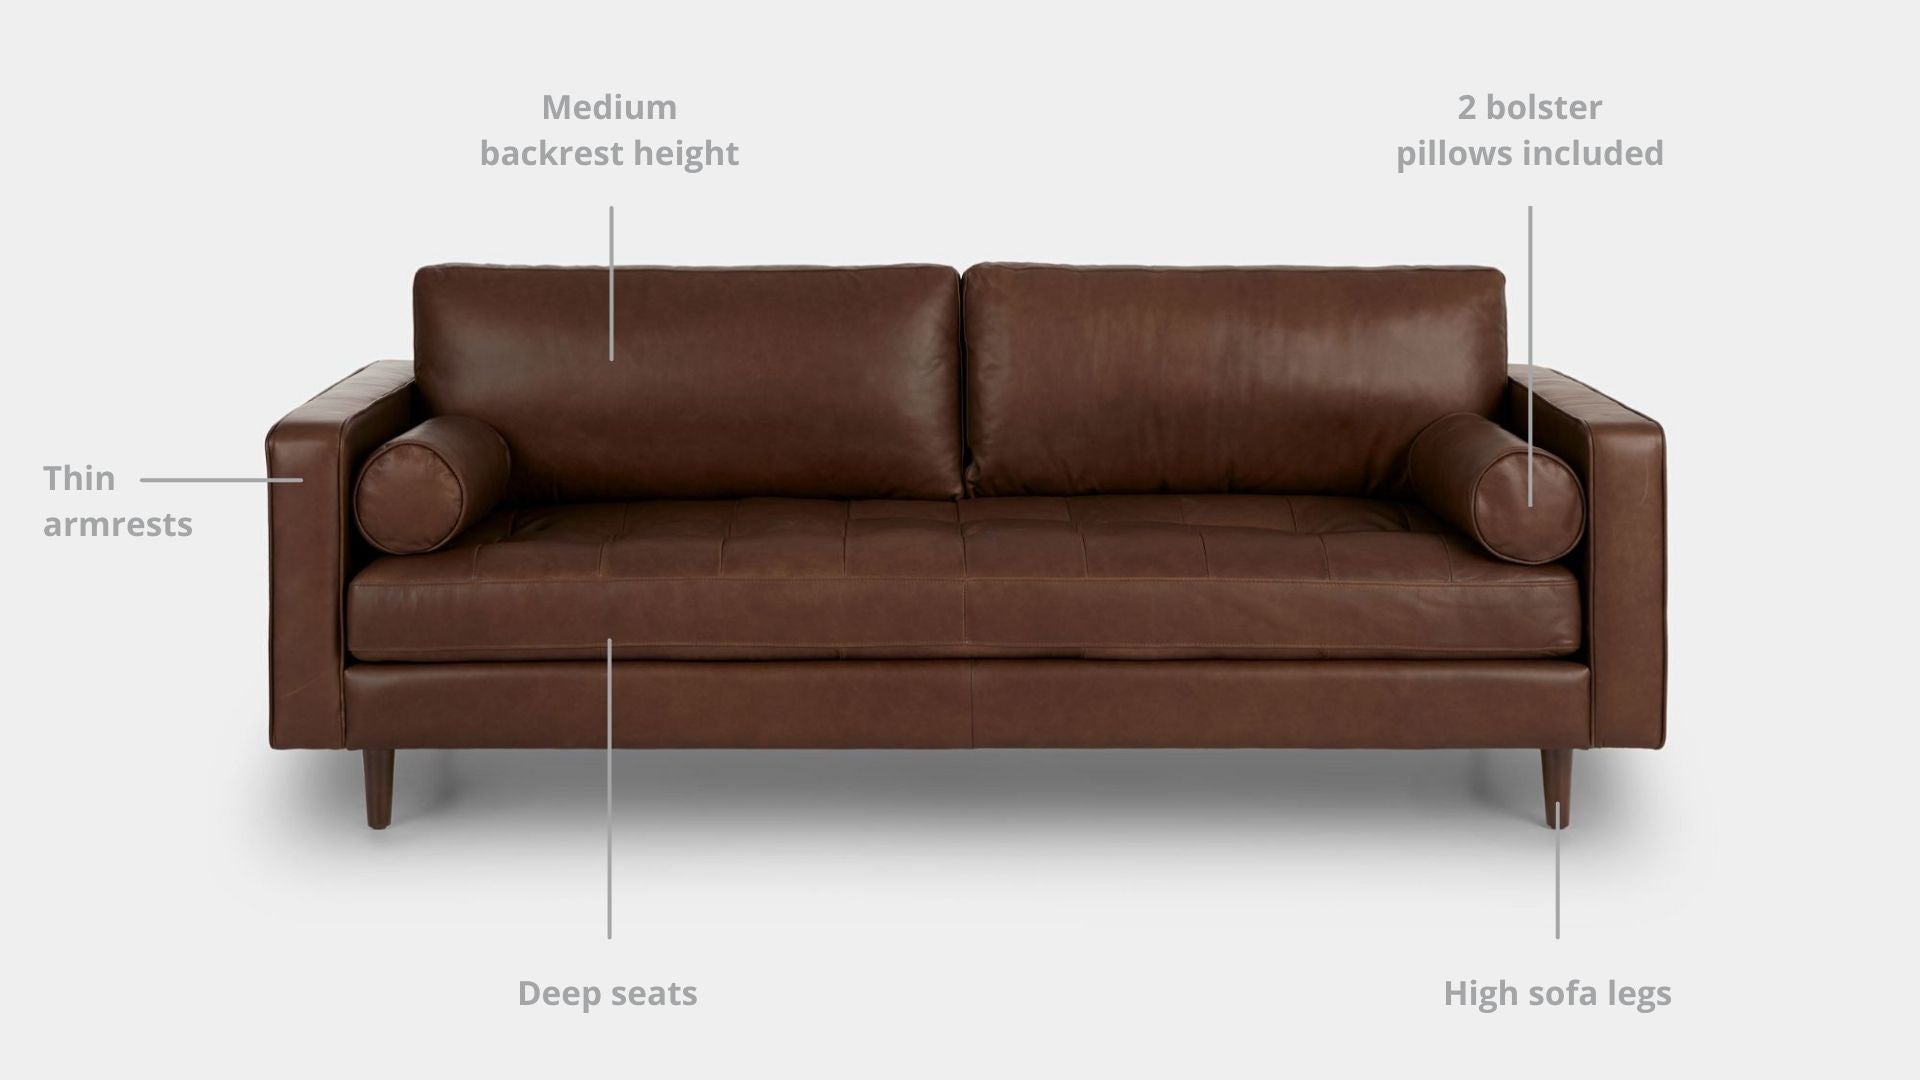 Key features such as armrest thickness, cushion height, seat depth and sofa leg height for Castle Half Leather Sofa